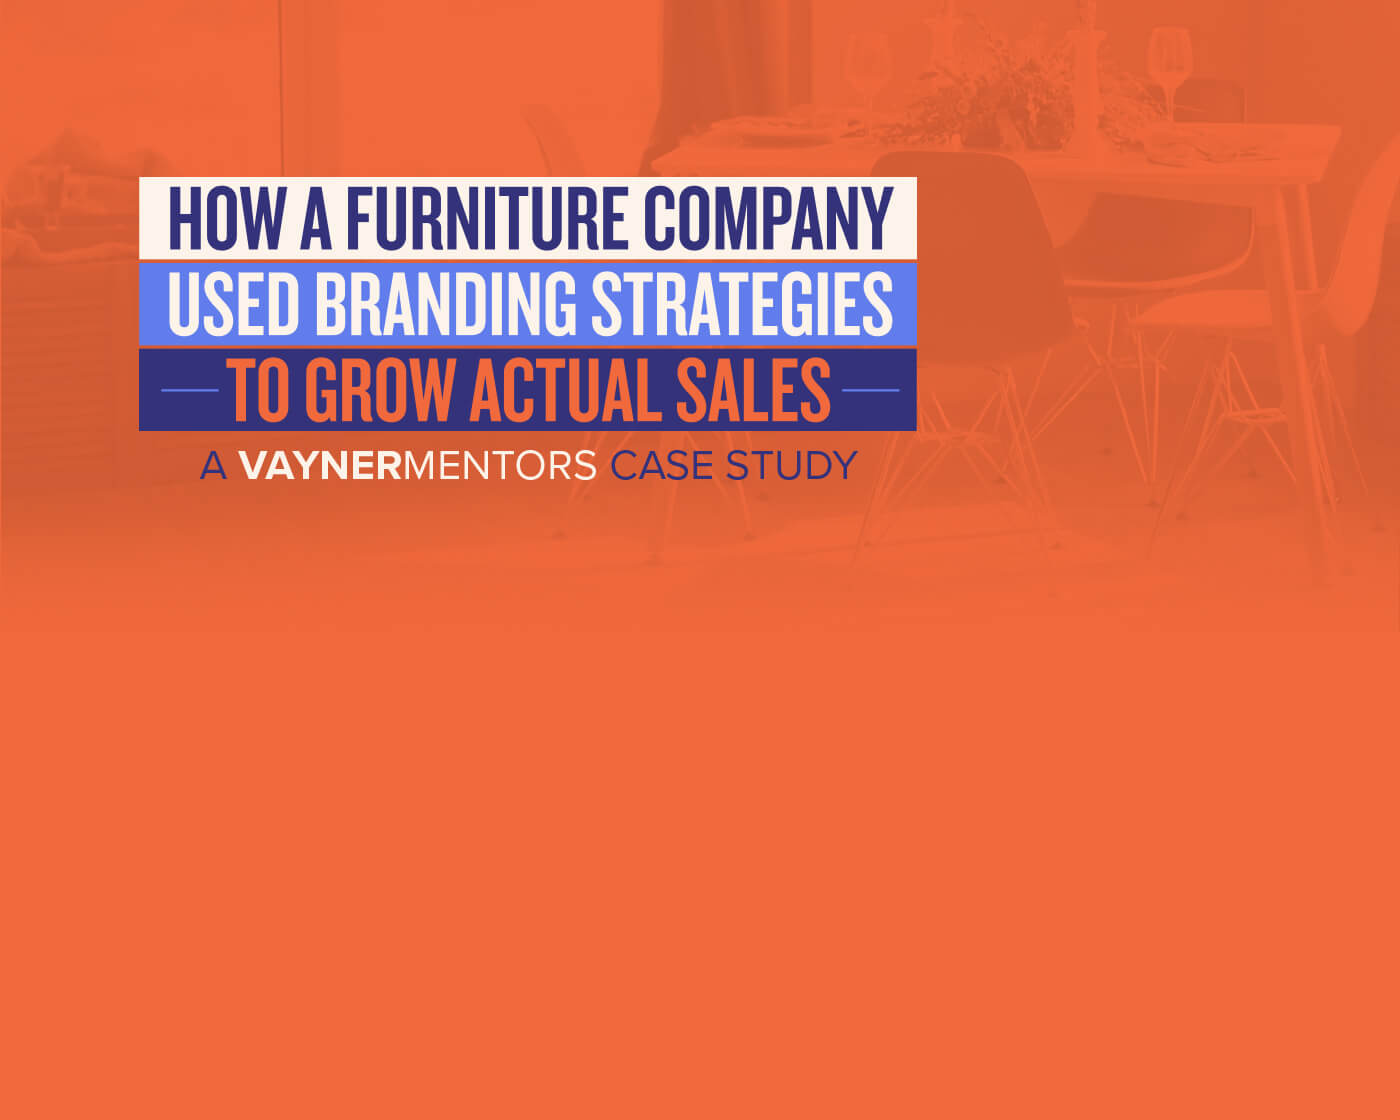 How a Furniture Company Used Branding Strategies to Grow Actual Sales